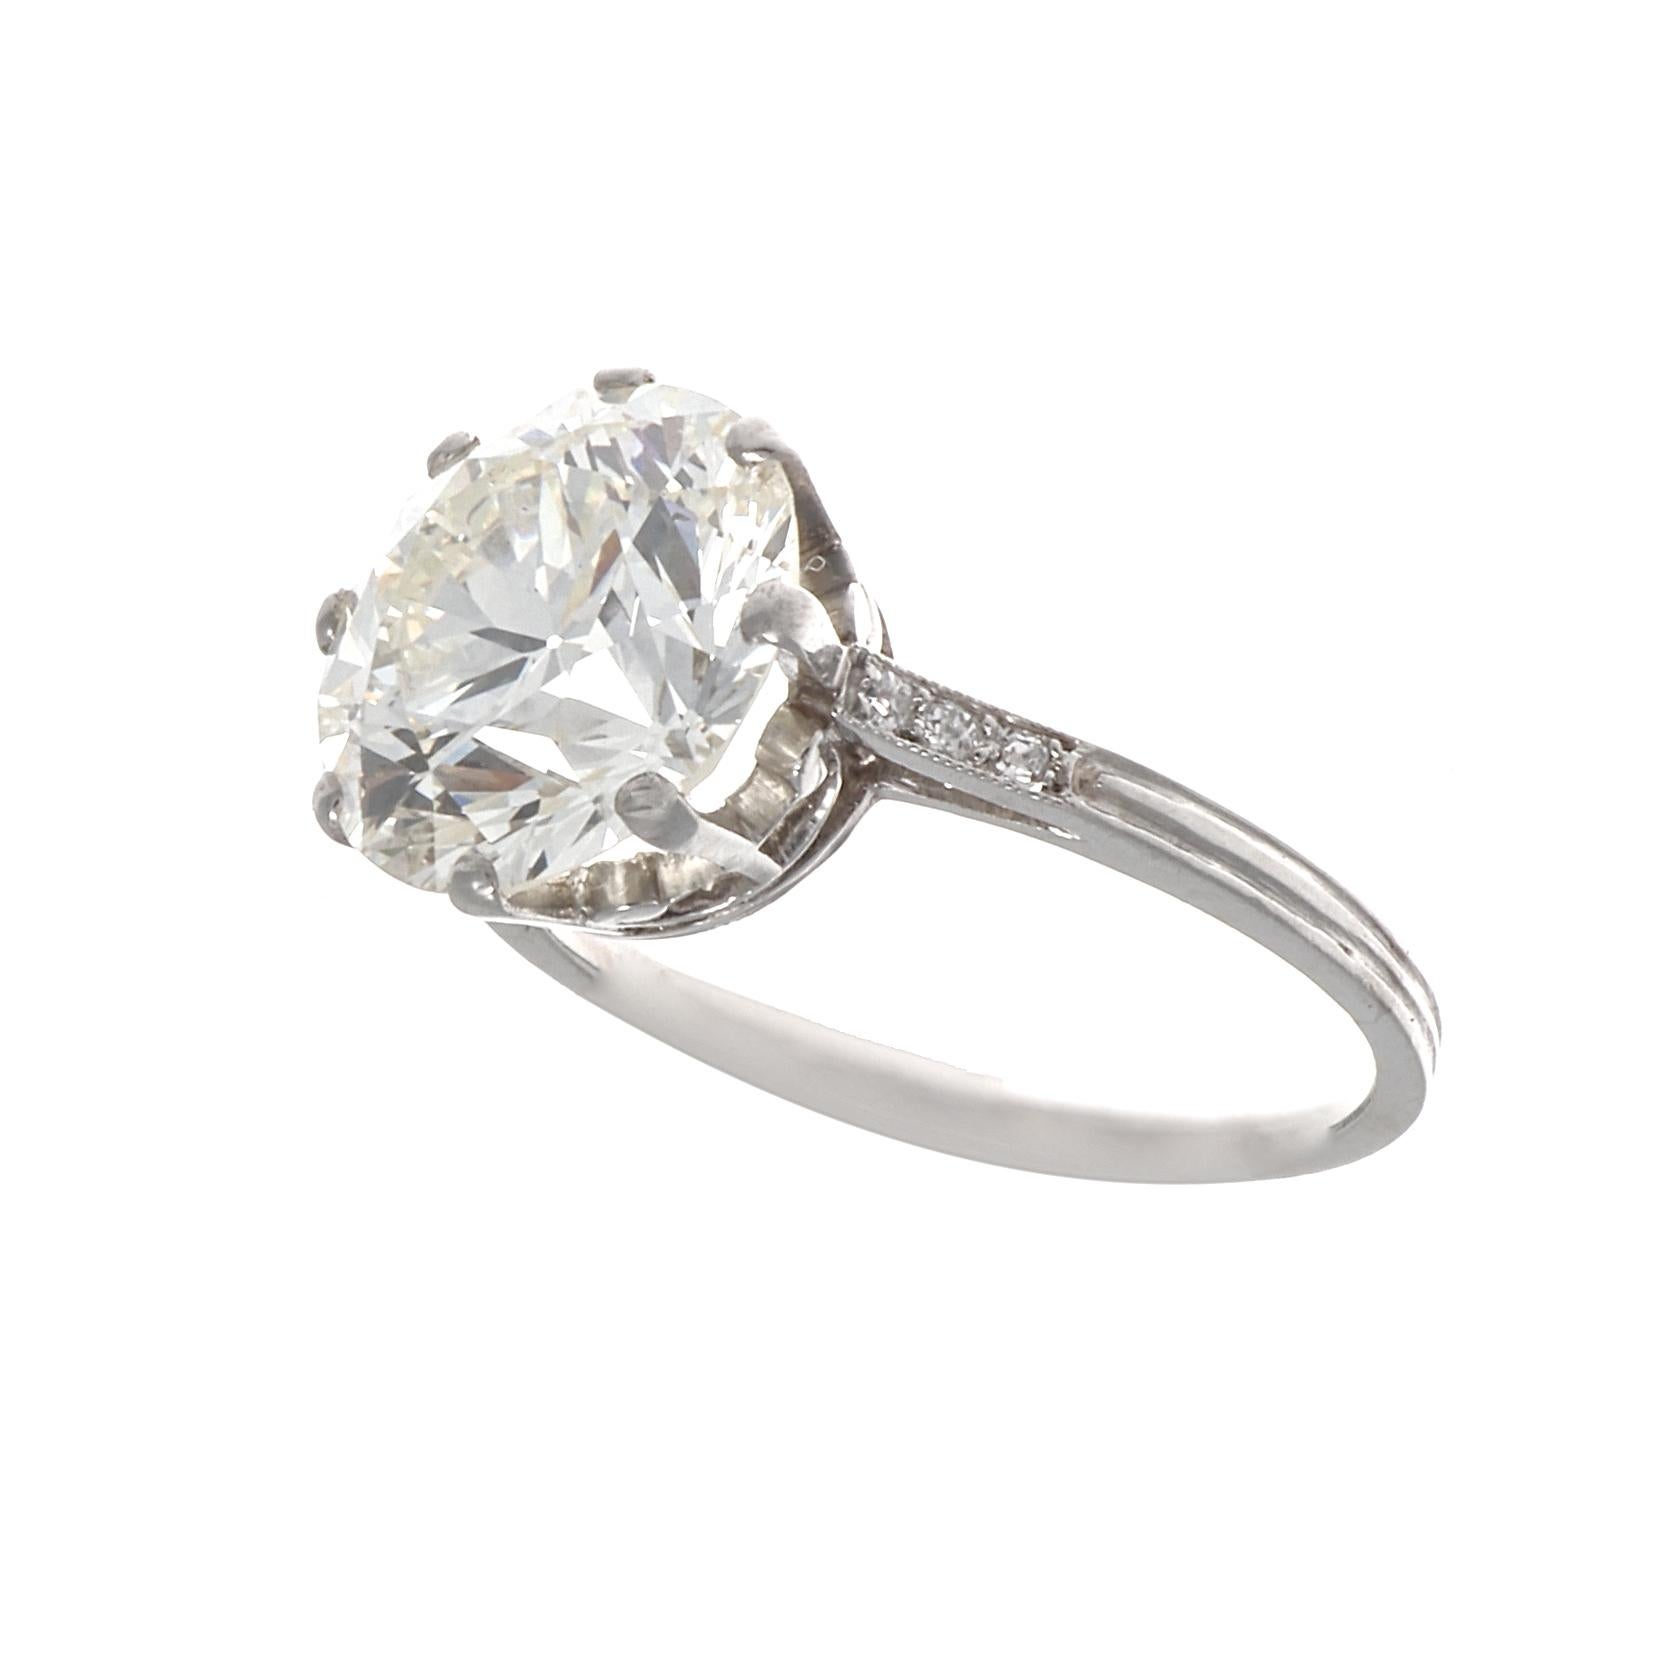 An image of strength and longevity, the diamond symbolizes the coming together and the everlasting bond two lovers will form. Featuring a 5.00 carat round diamond GIA certified as L color, SI2 clarity. Perfectly mounted in an 8 sturdy prong